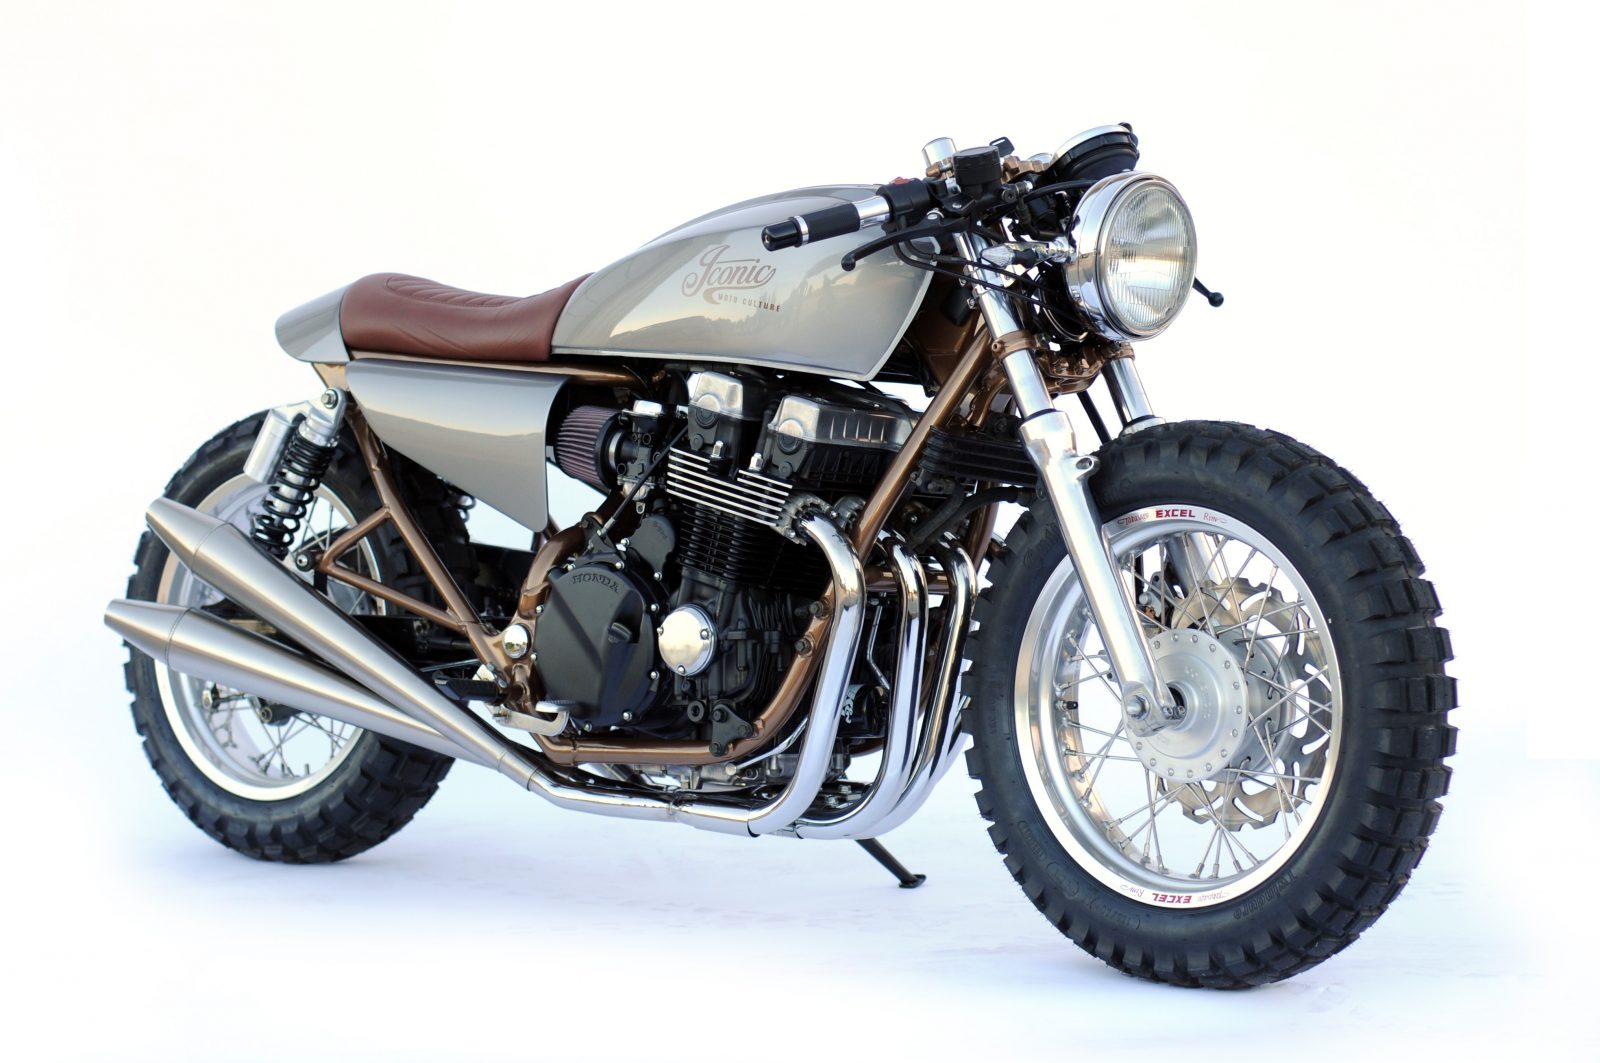 Honda Cb750 Is The Most Expensive Japanese Bike Ever Sold In An Auction Imotorbike News